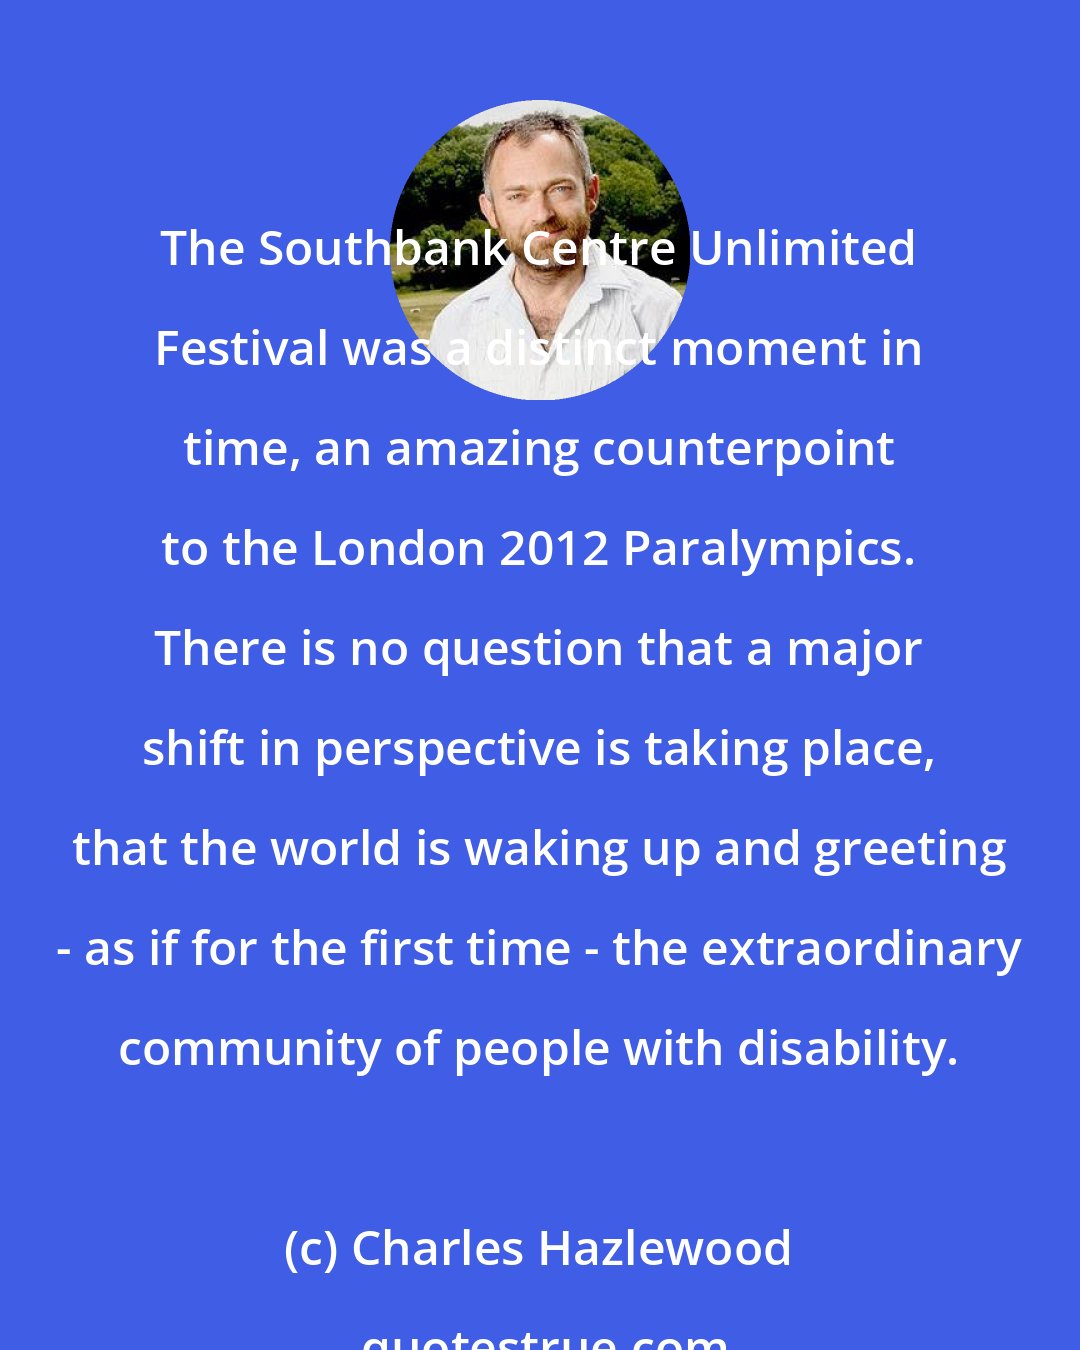 Charles Hazlewood: The Southbank Centre Unlimited Festival was a distinct moment in time, an amazing counterpoint to the London 2012 Paralympics. There is no question that a major shift in perspective is taking place, that the world is waking up and greeting - as if for the first time - the extraordinary community of people with disability.